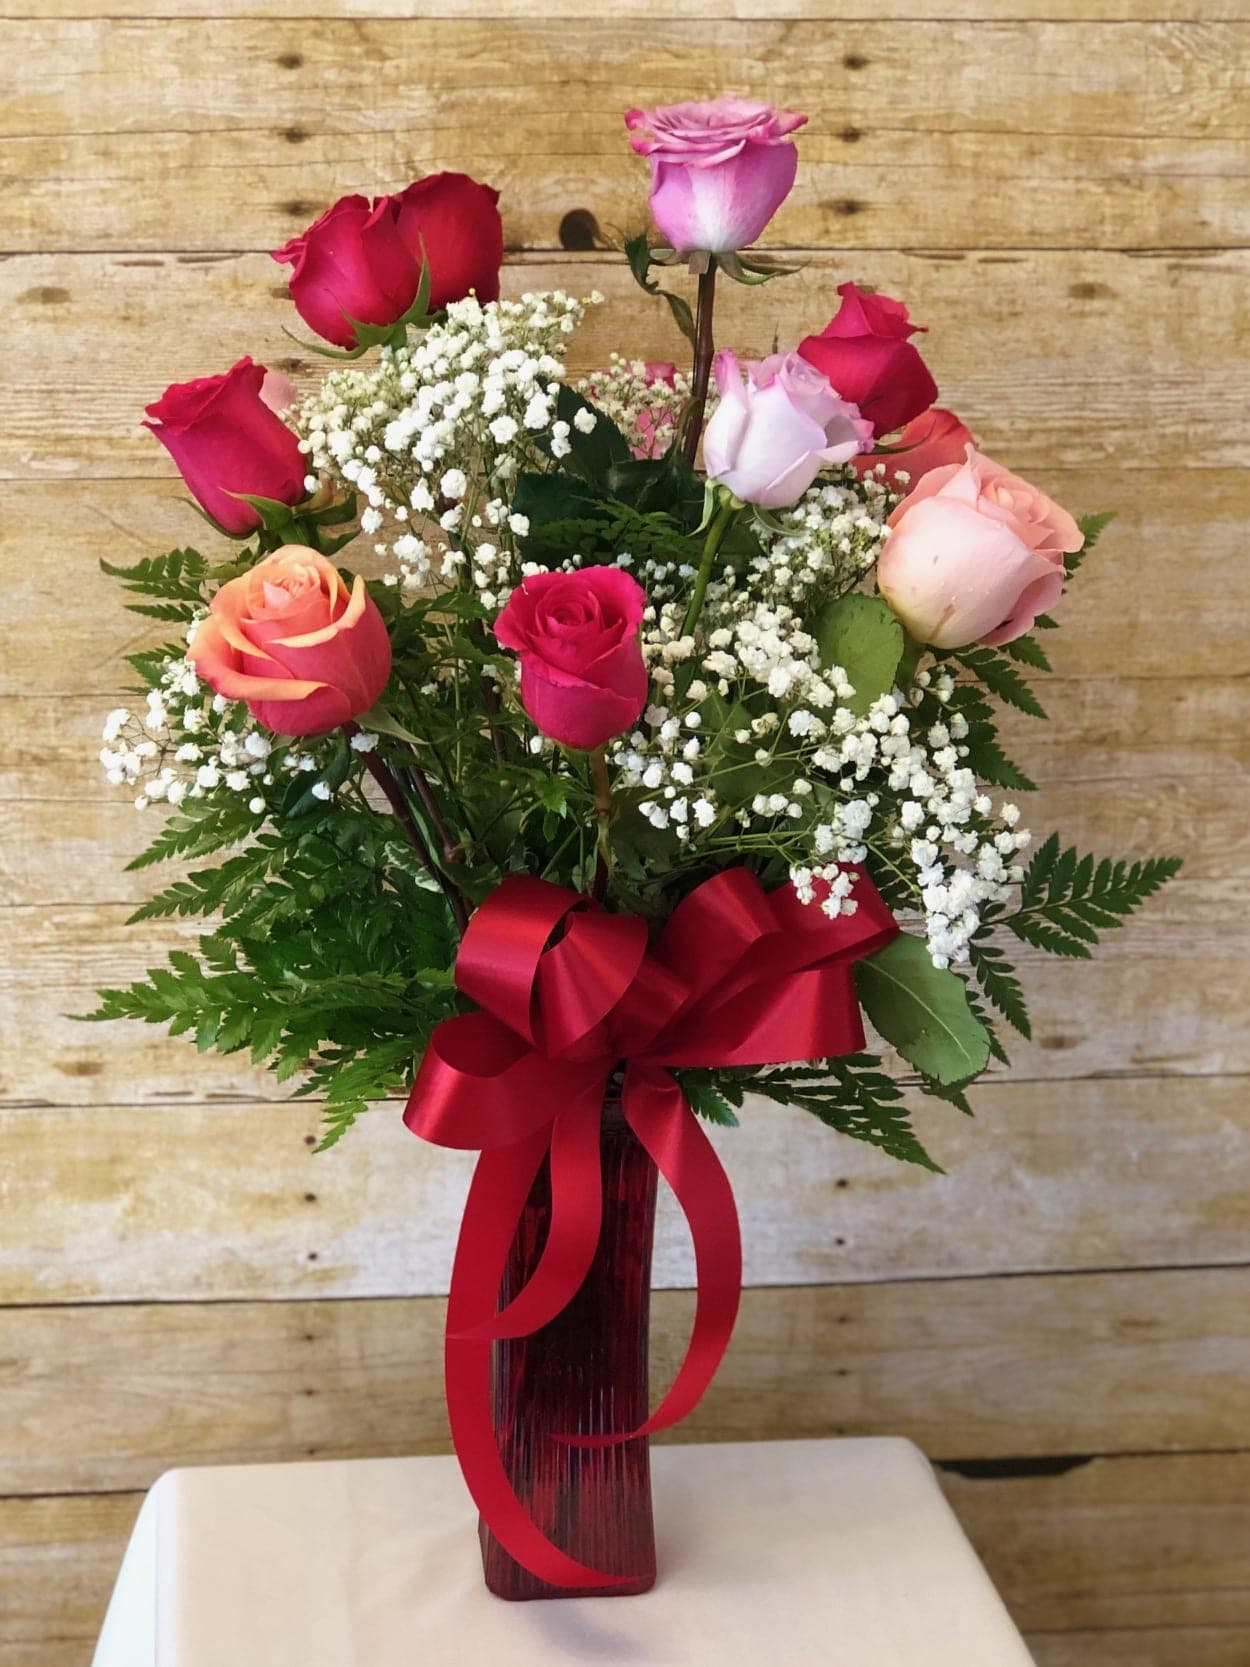 ROMANTIC ROSE SPECIAL - This romantic bouquet holds roses in varying red, pink and purple hues. Certain to be a cherished gift! These vivacious roses are arranged with greens and filler in a colored glass vase and dressed with a bow.  19h x 14w